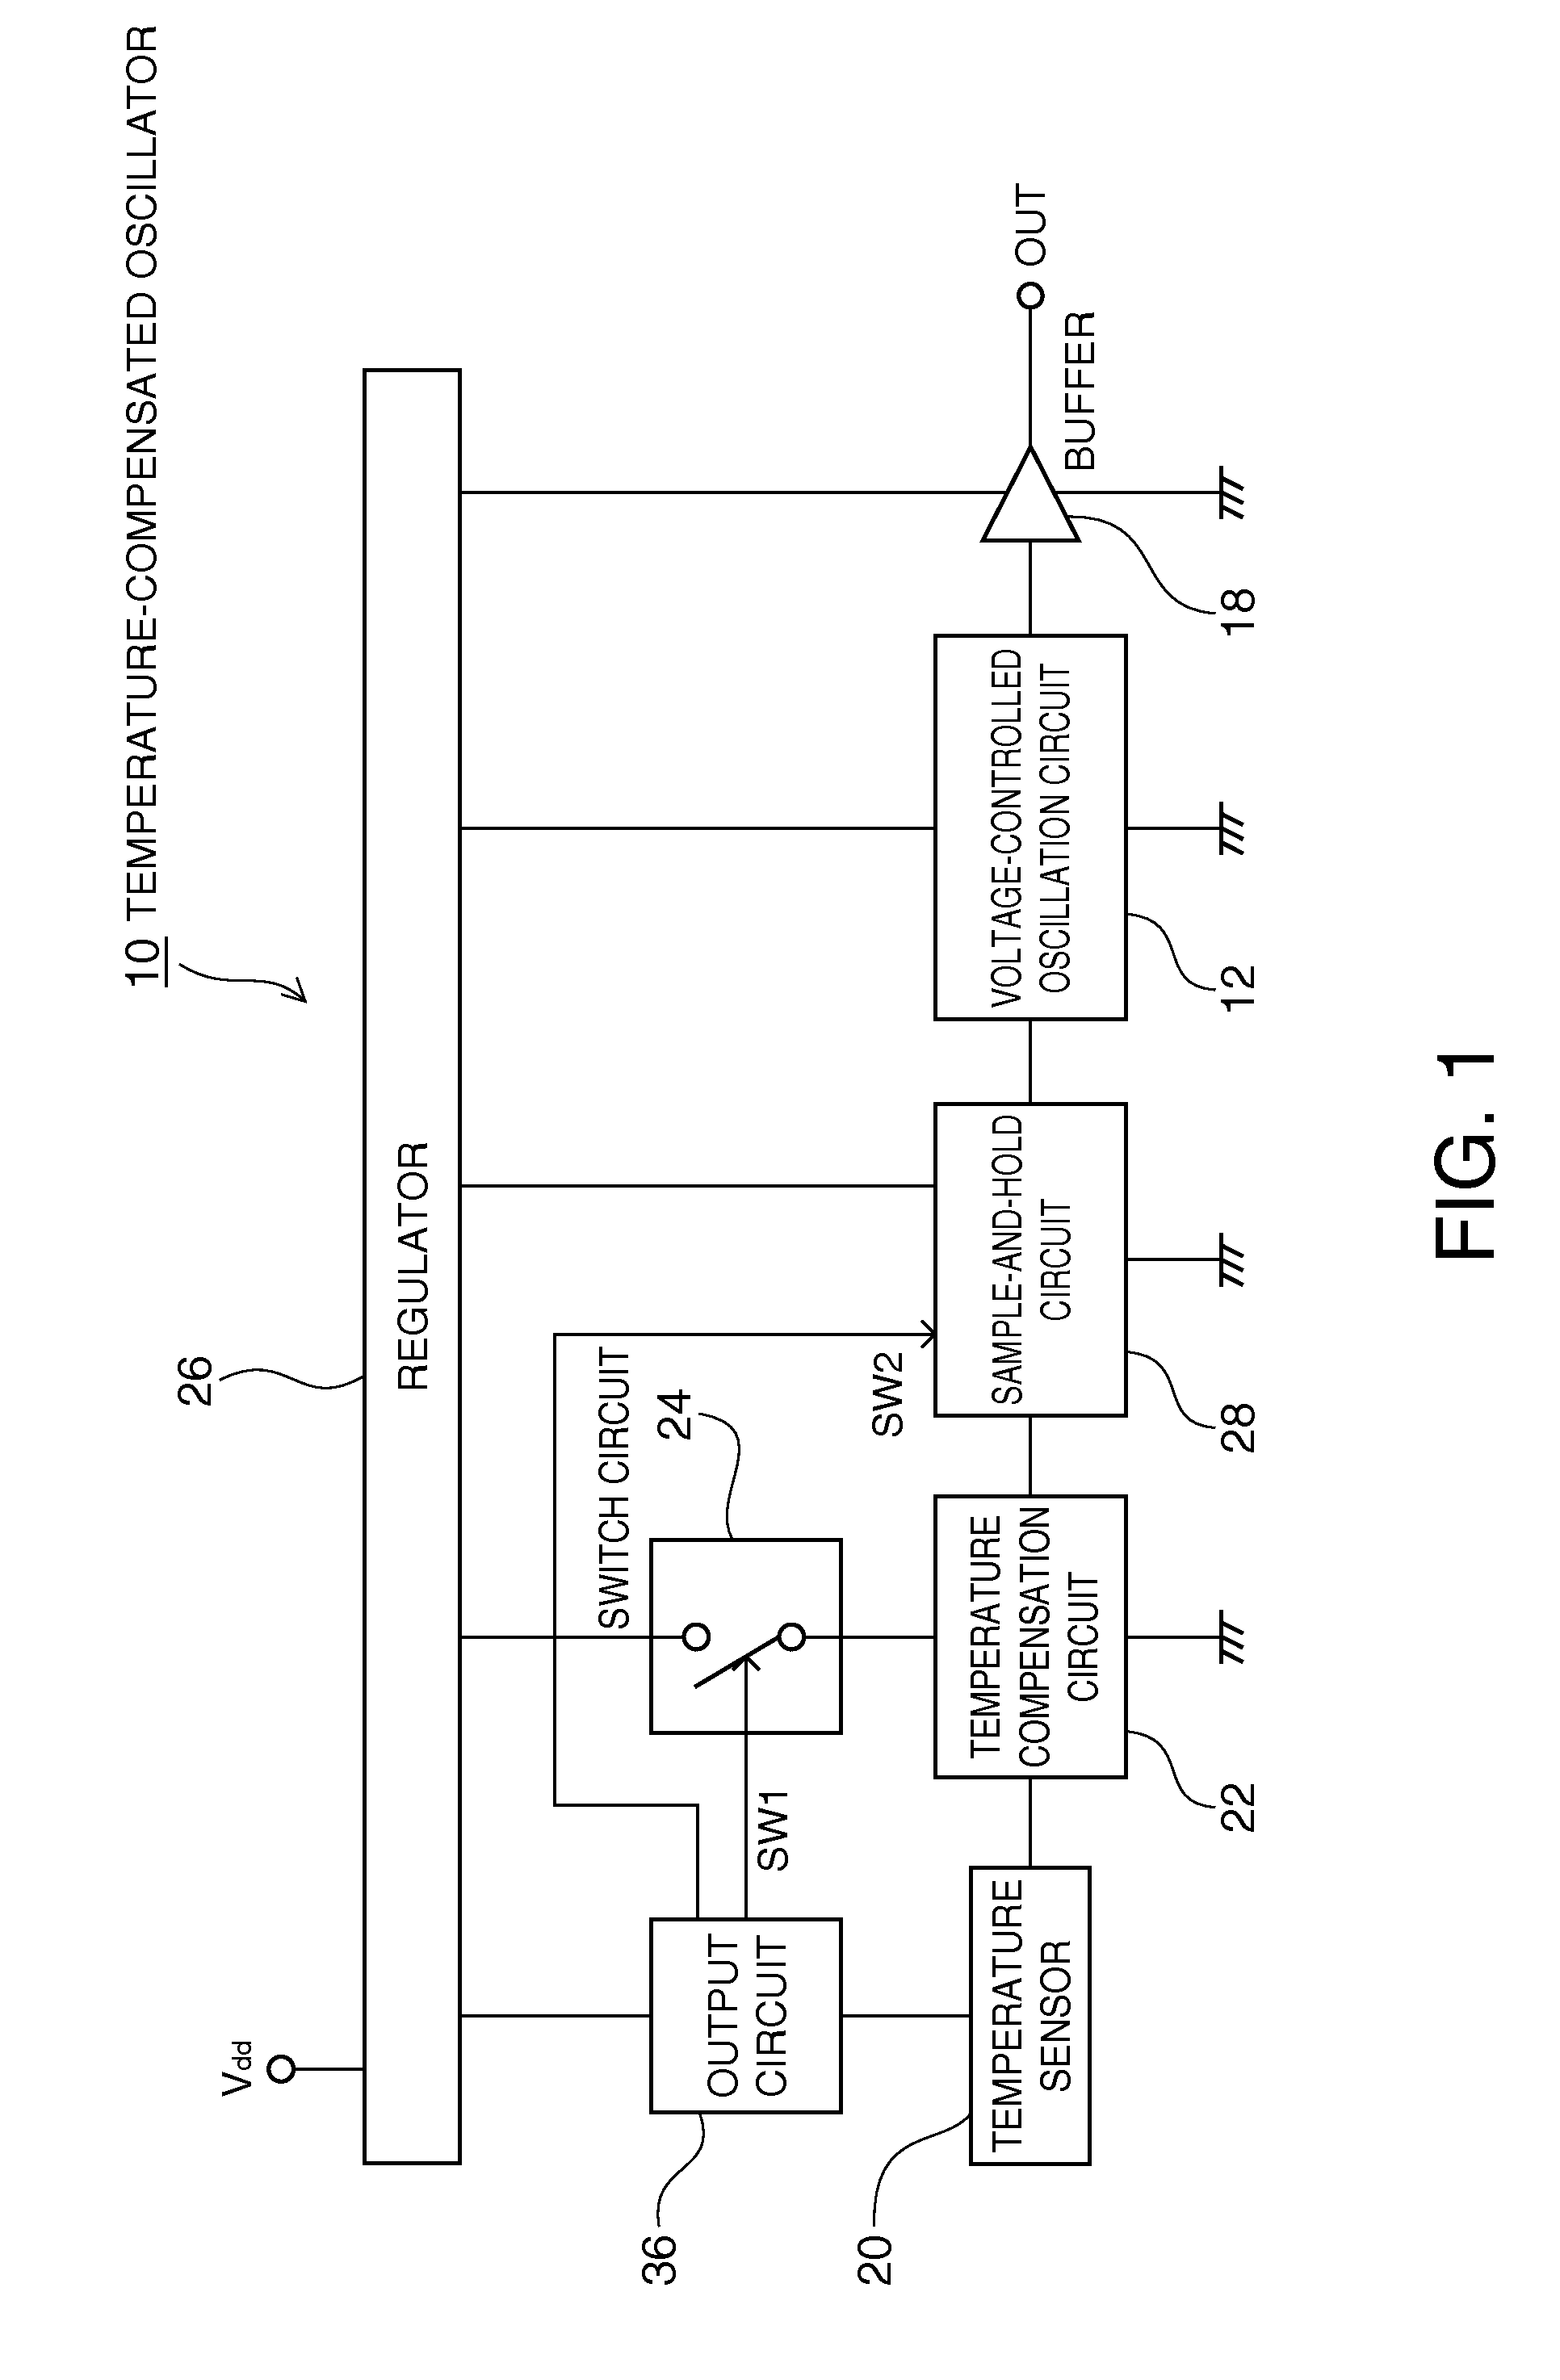 Temperature-compensated oscillator and electronic device